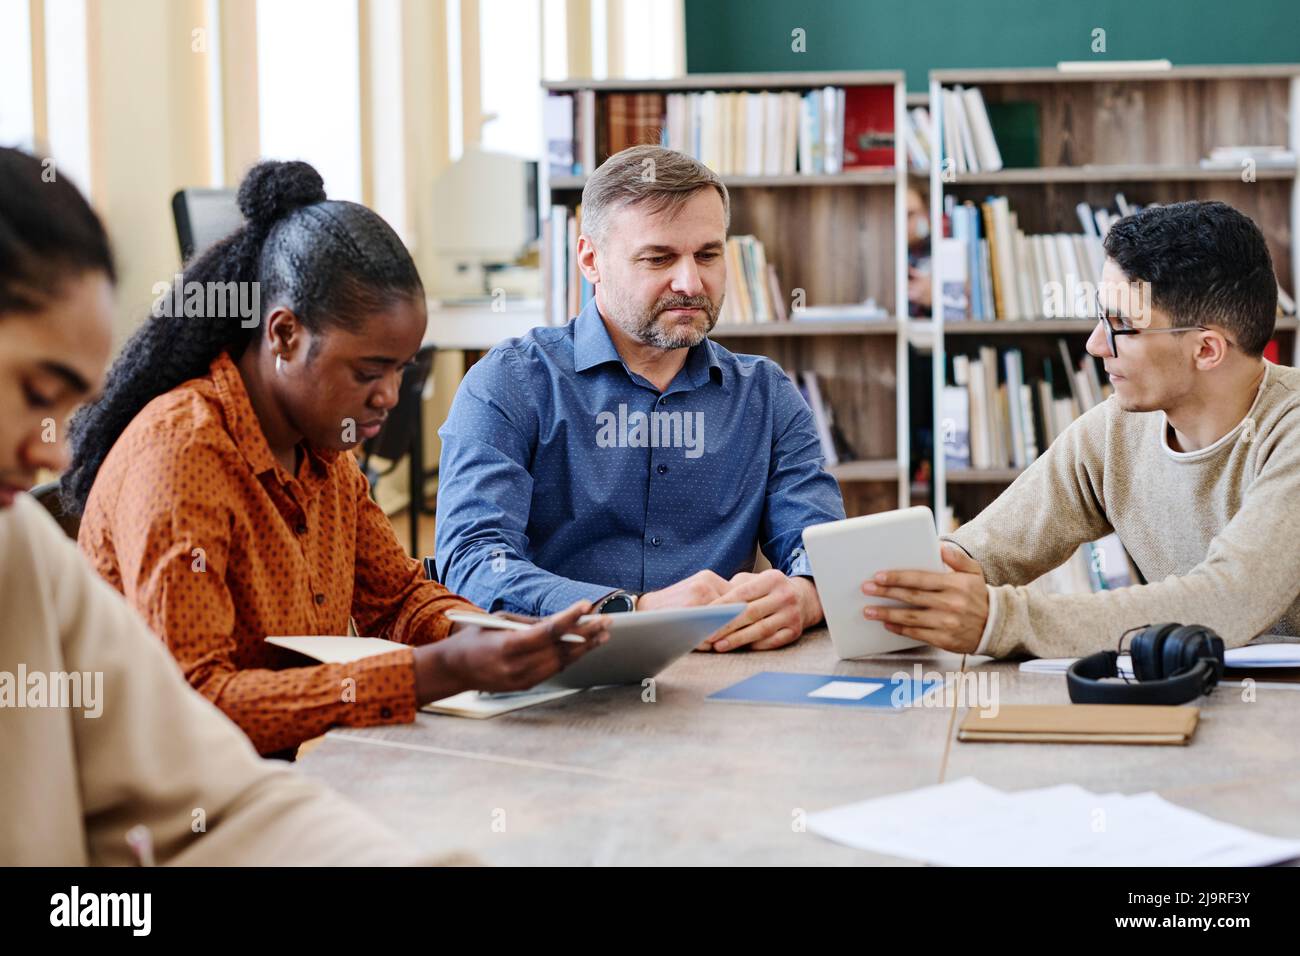 Mature language teacher sitting at table with his ethnically diverse students watching them doing exercise and answering questions Stock Photo